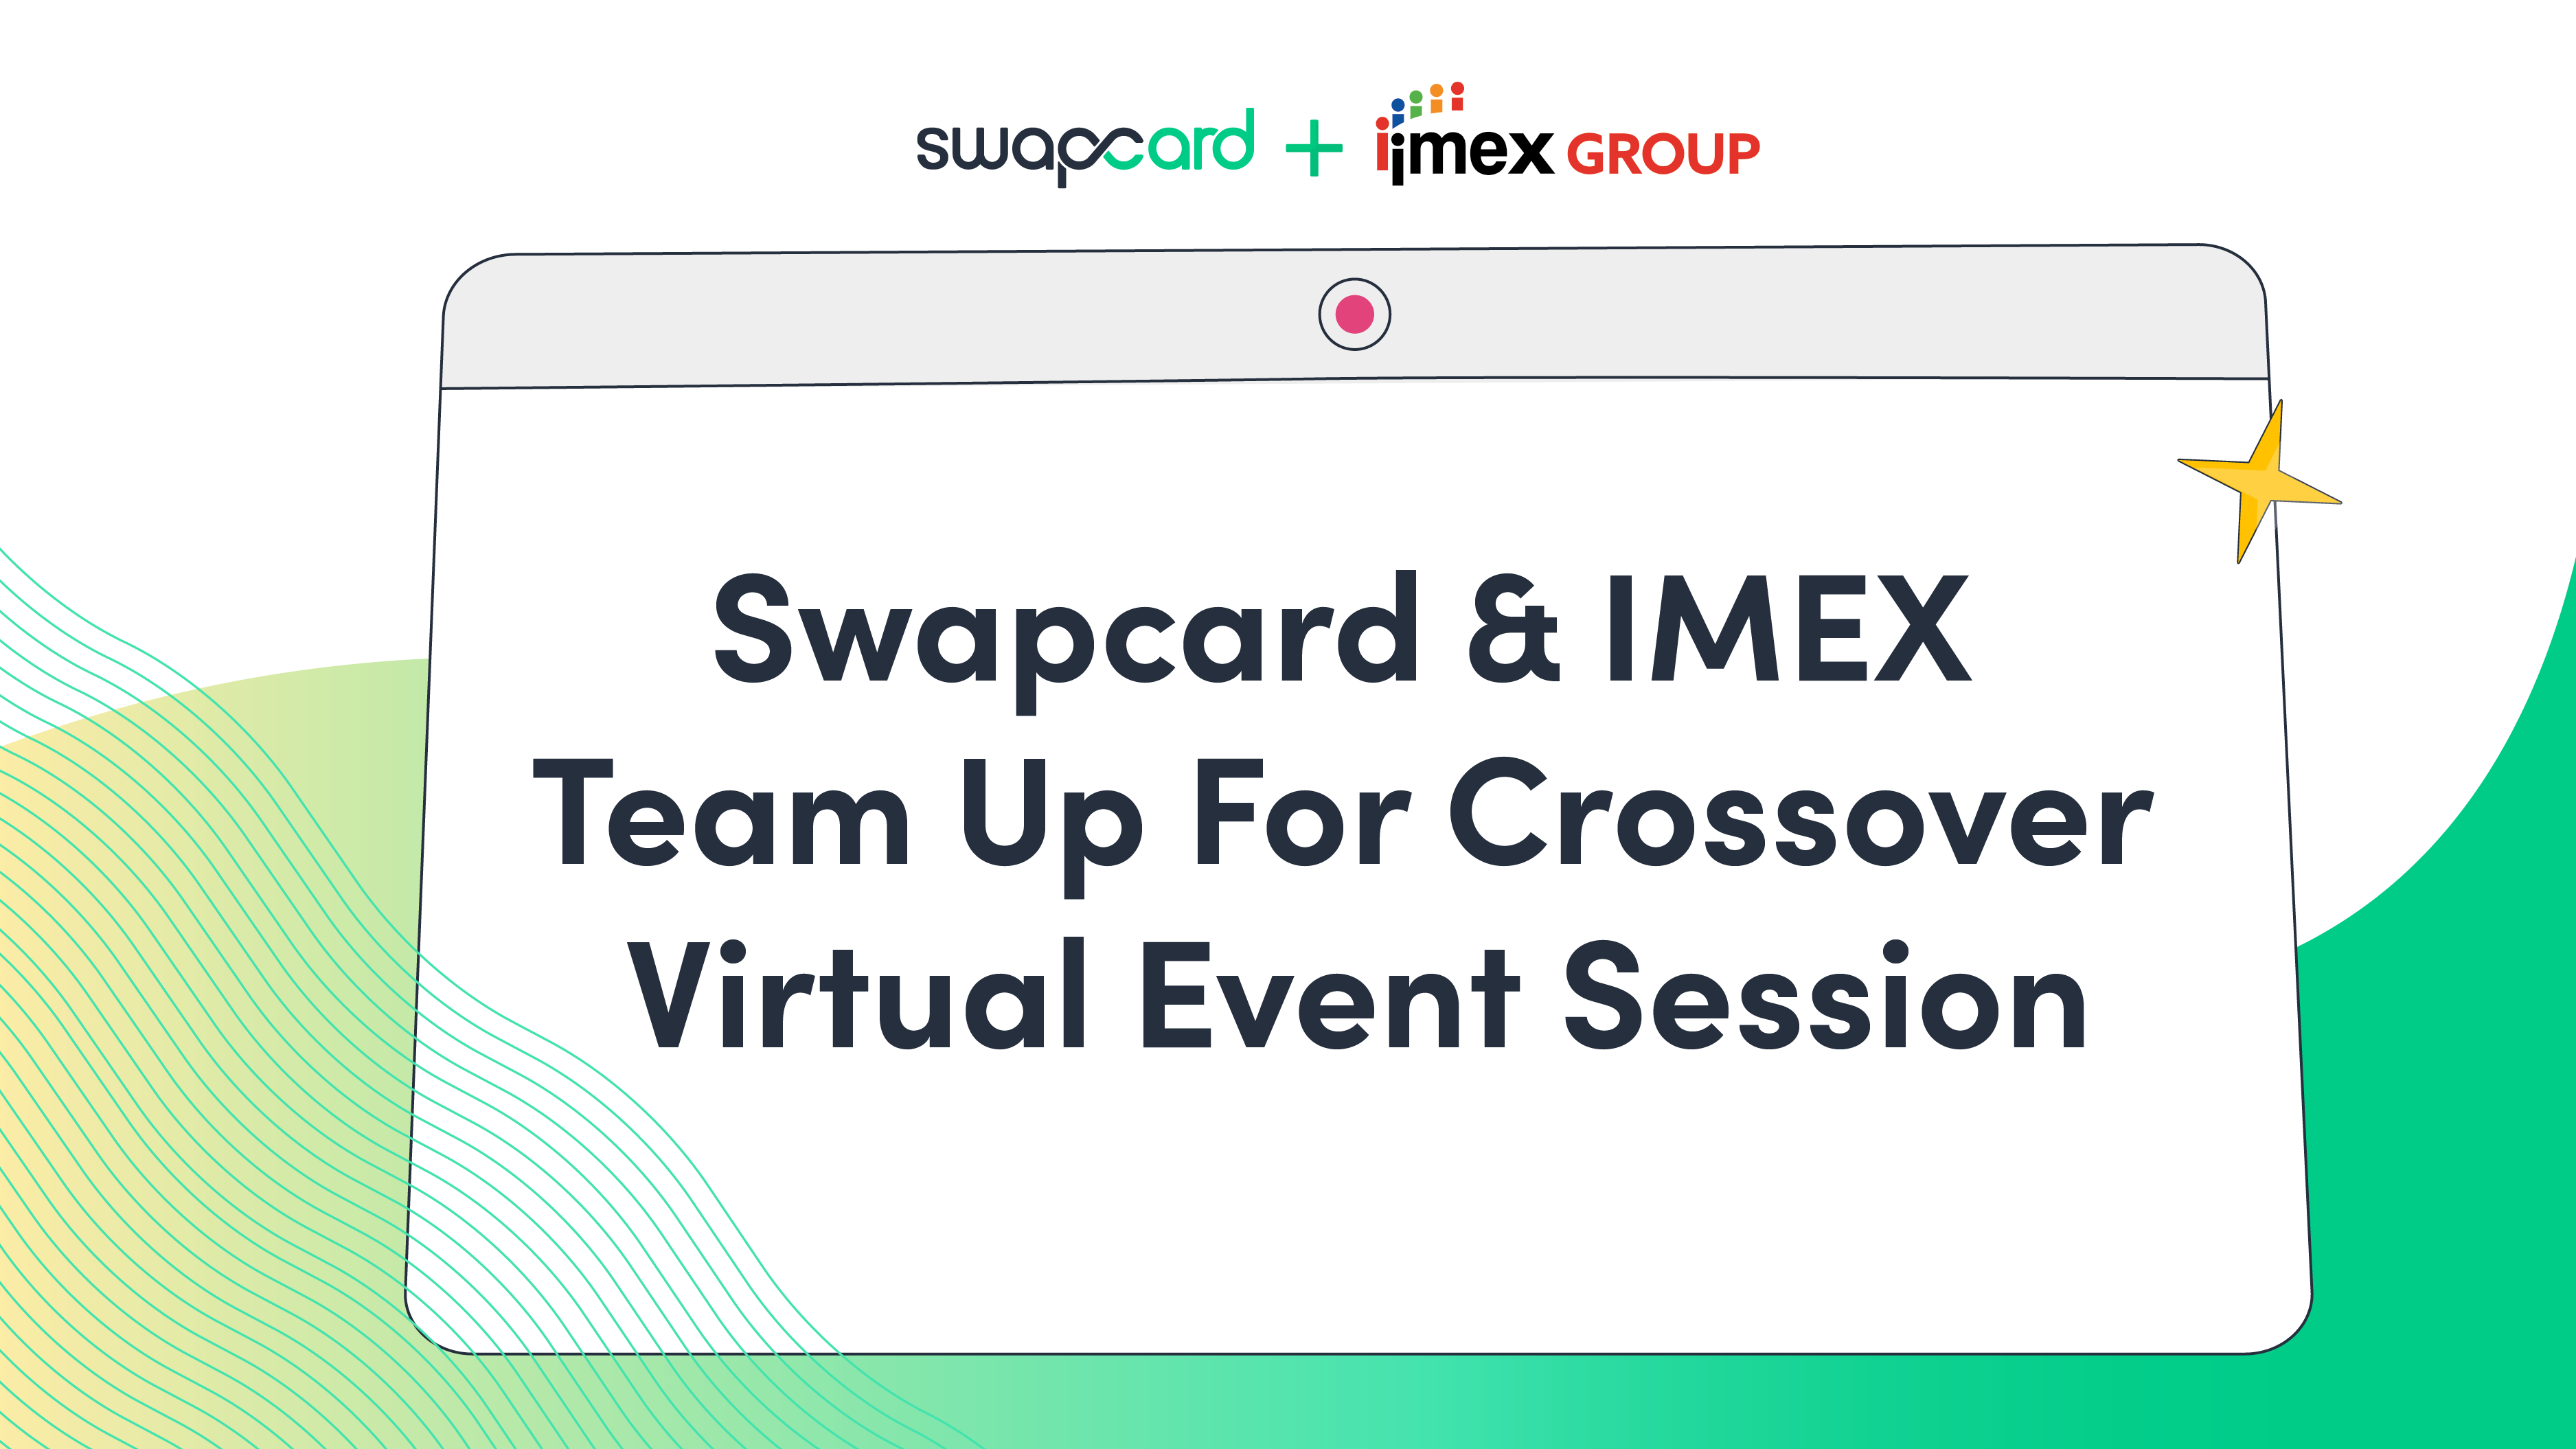 Swapcard & IMEX Team Up For Crossover Virtual Event